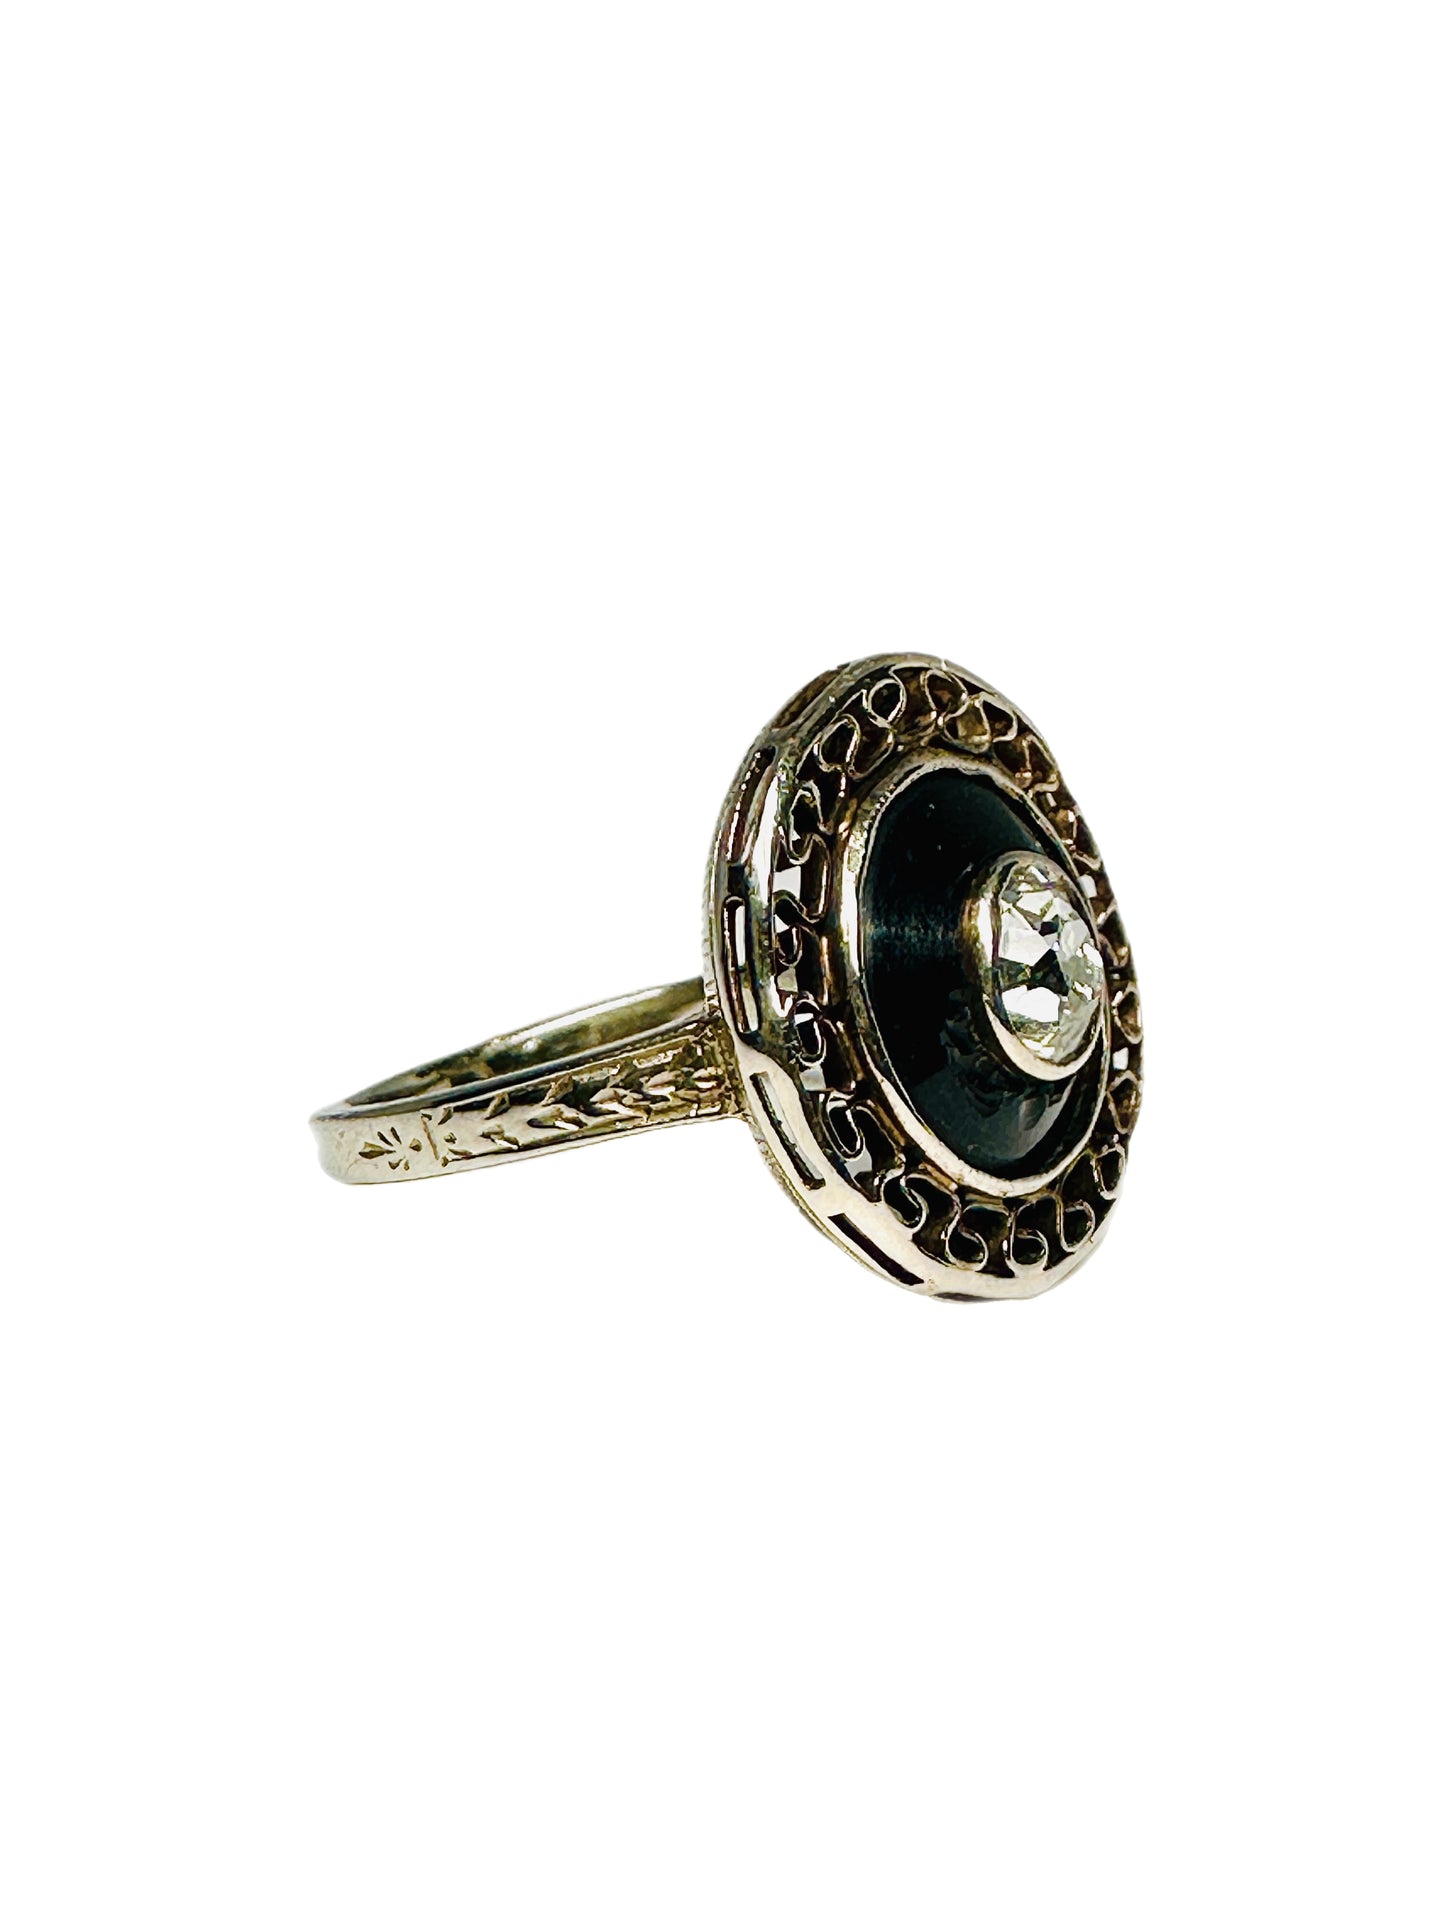 Antique Onyx and Old Mine Cut Diamond Target Ring